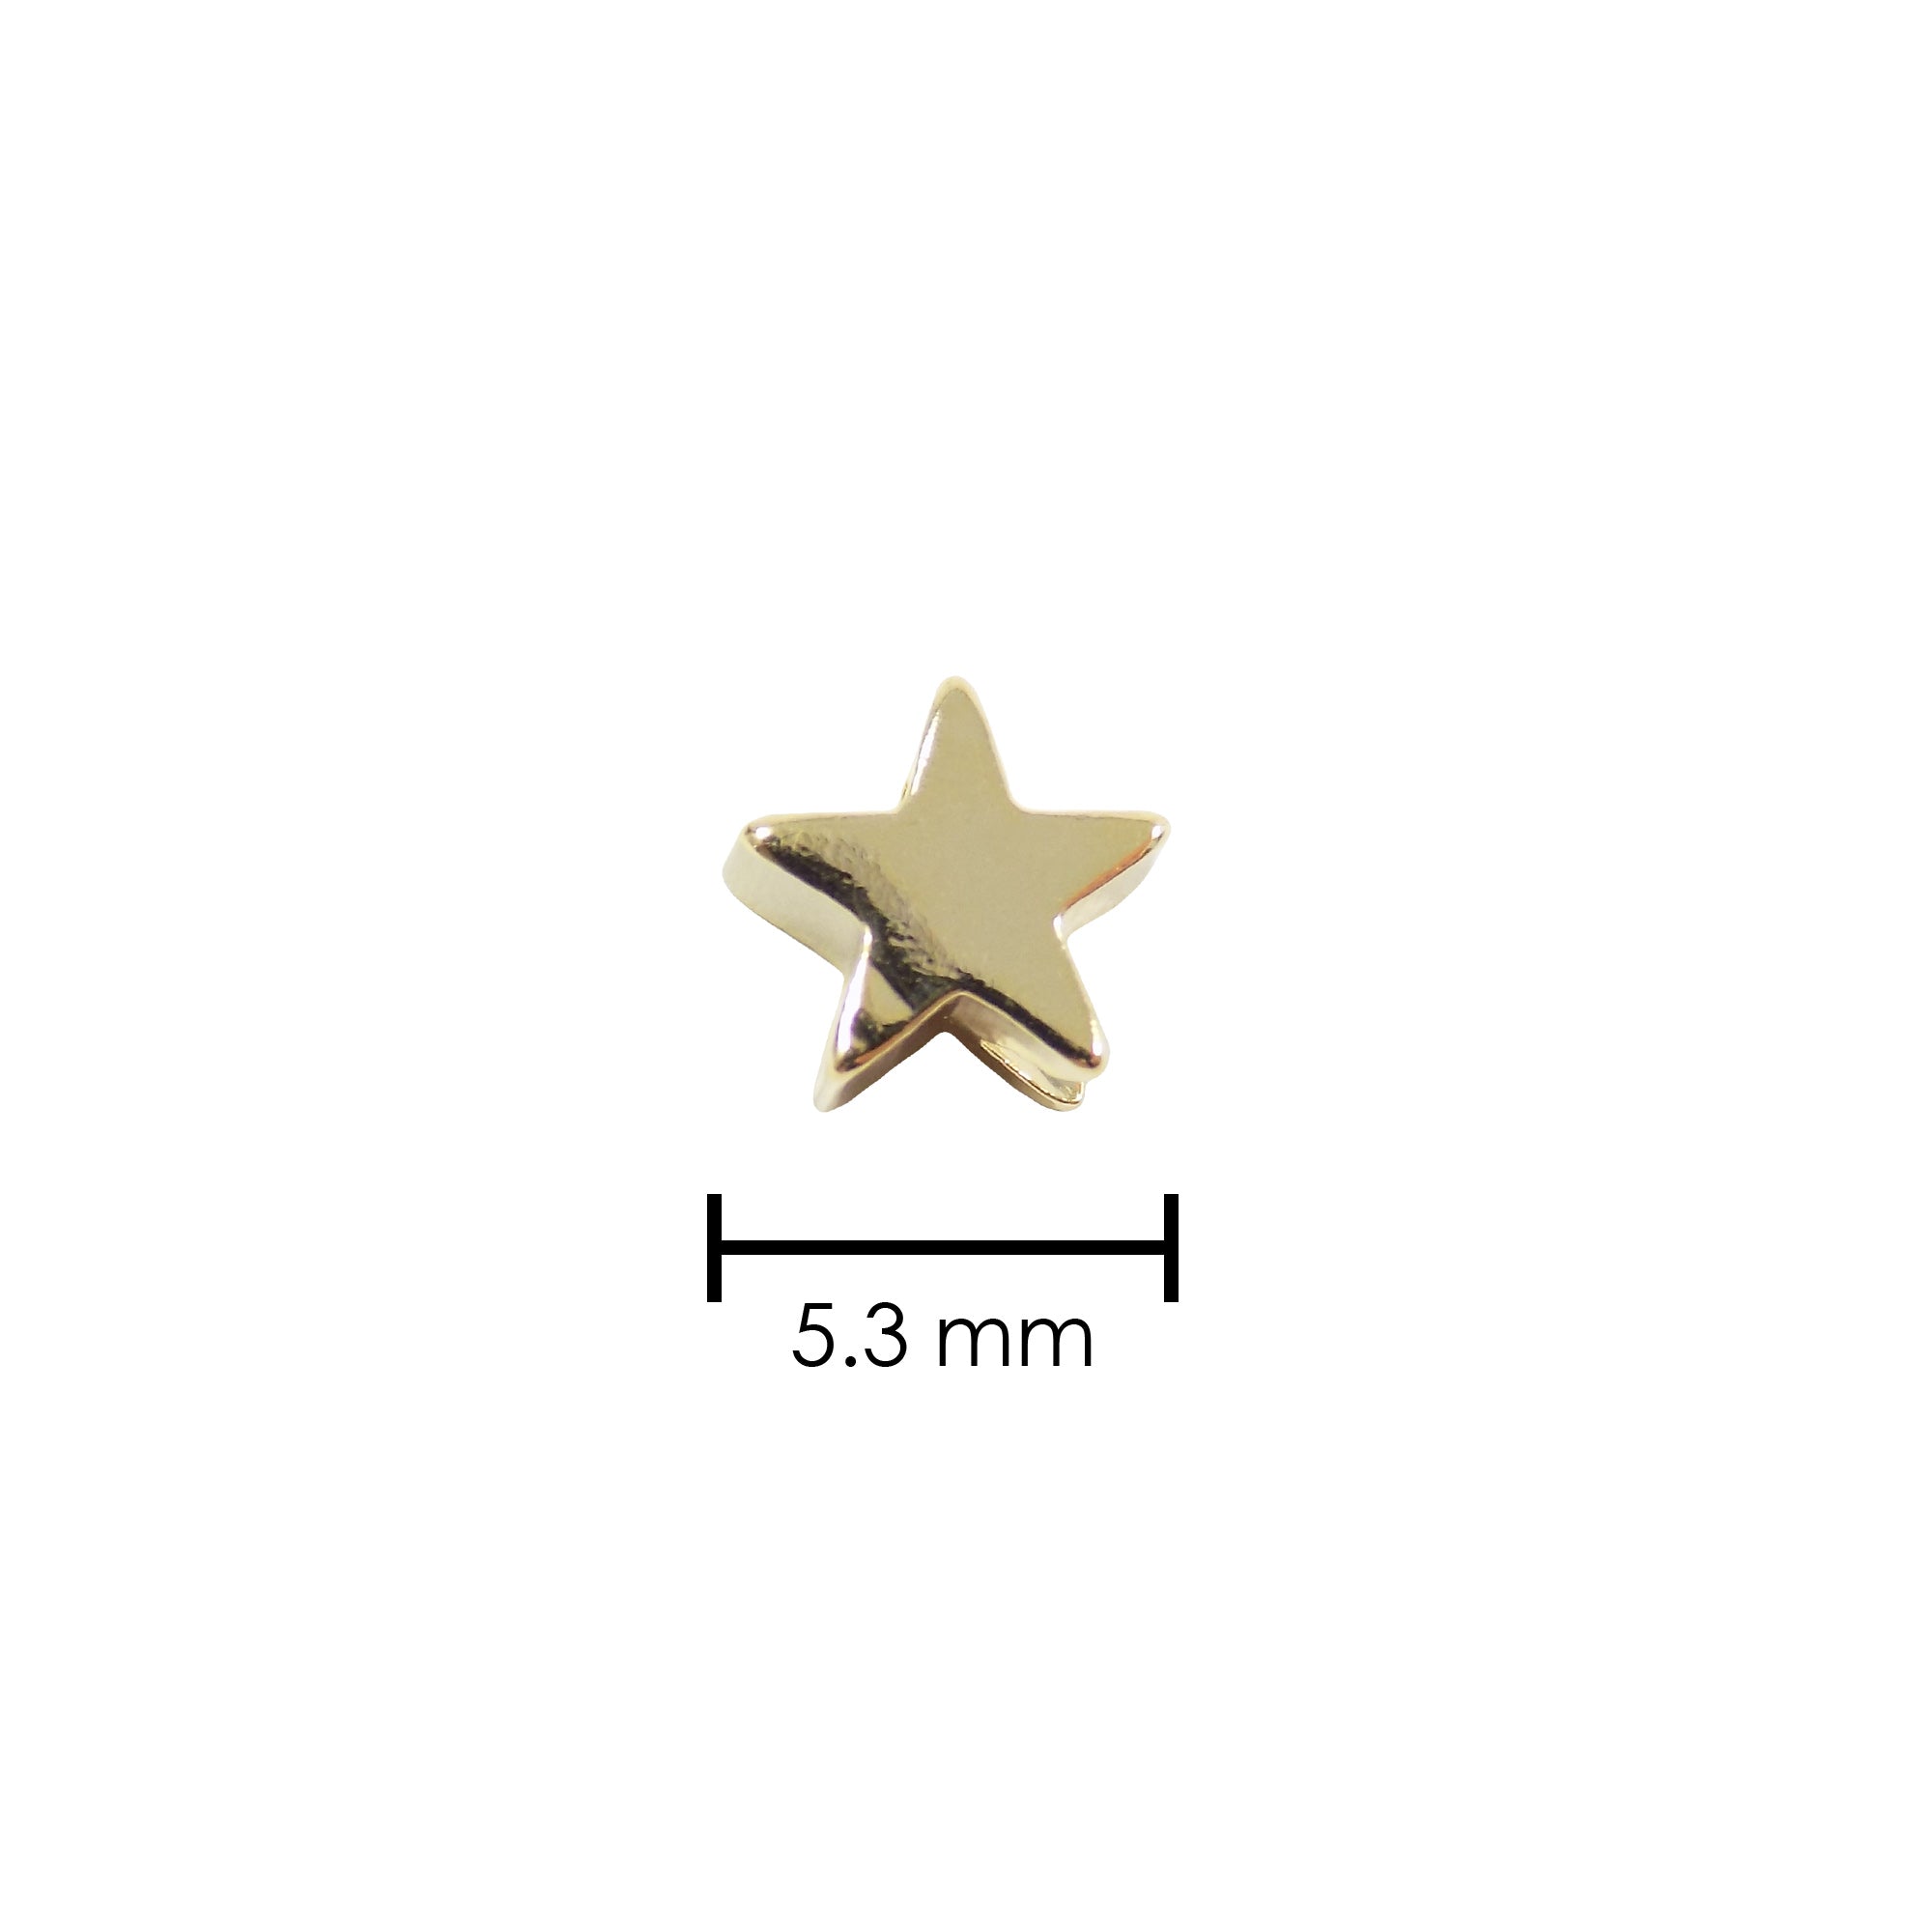 Tiny Star Slider Charm (6 pieces)Gold Plated Mini Star Spacer Beads, Sliding Little Star Separator, Celestial Beads Wholesale